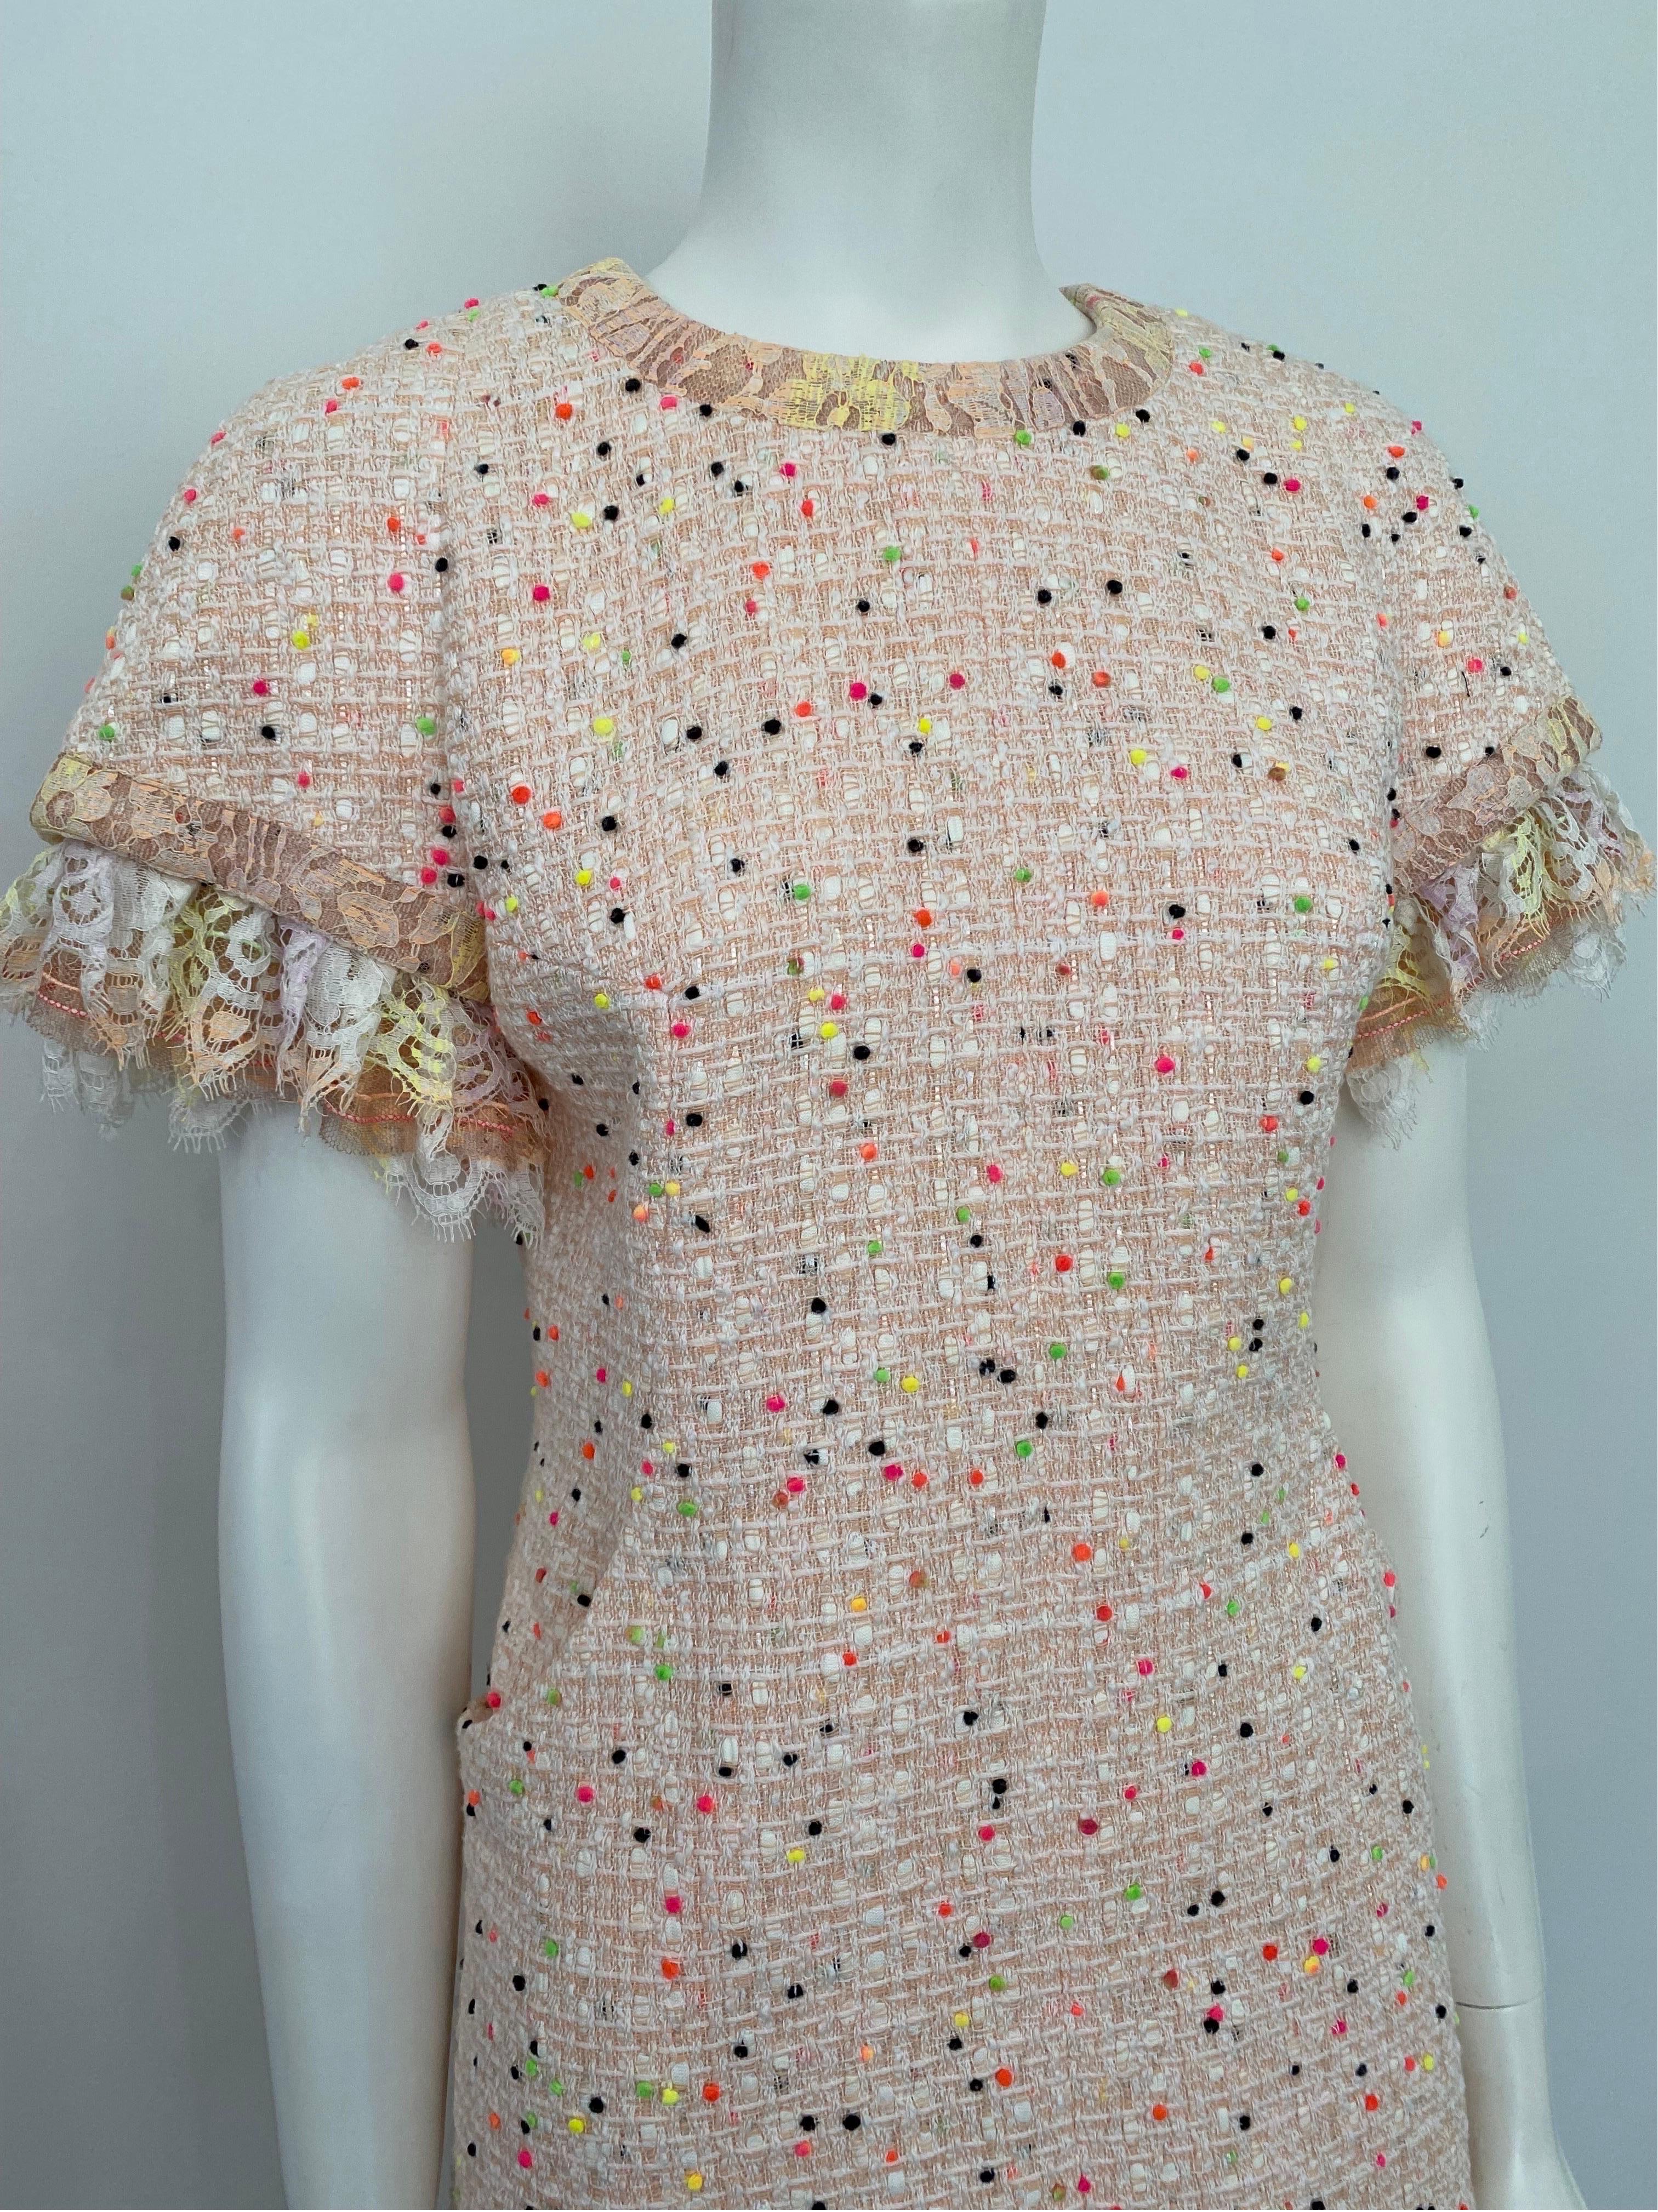 Women's Chanel Peach and multi dot tweed Dress with removable lace detail - Sz 36